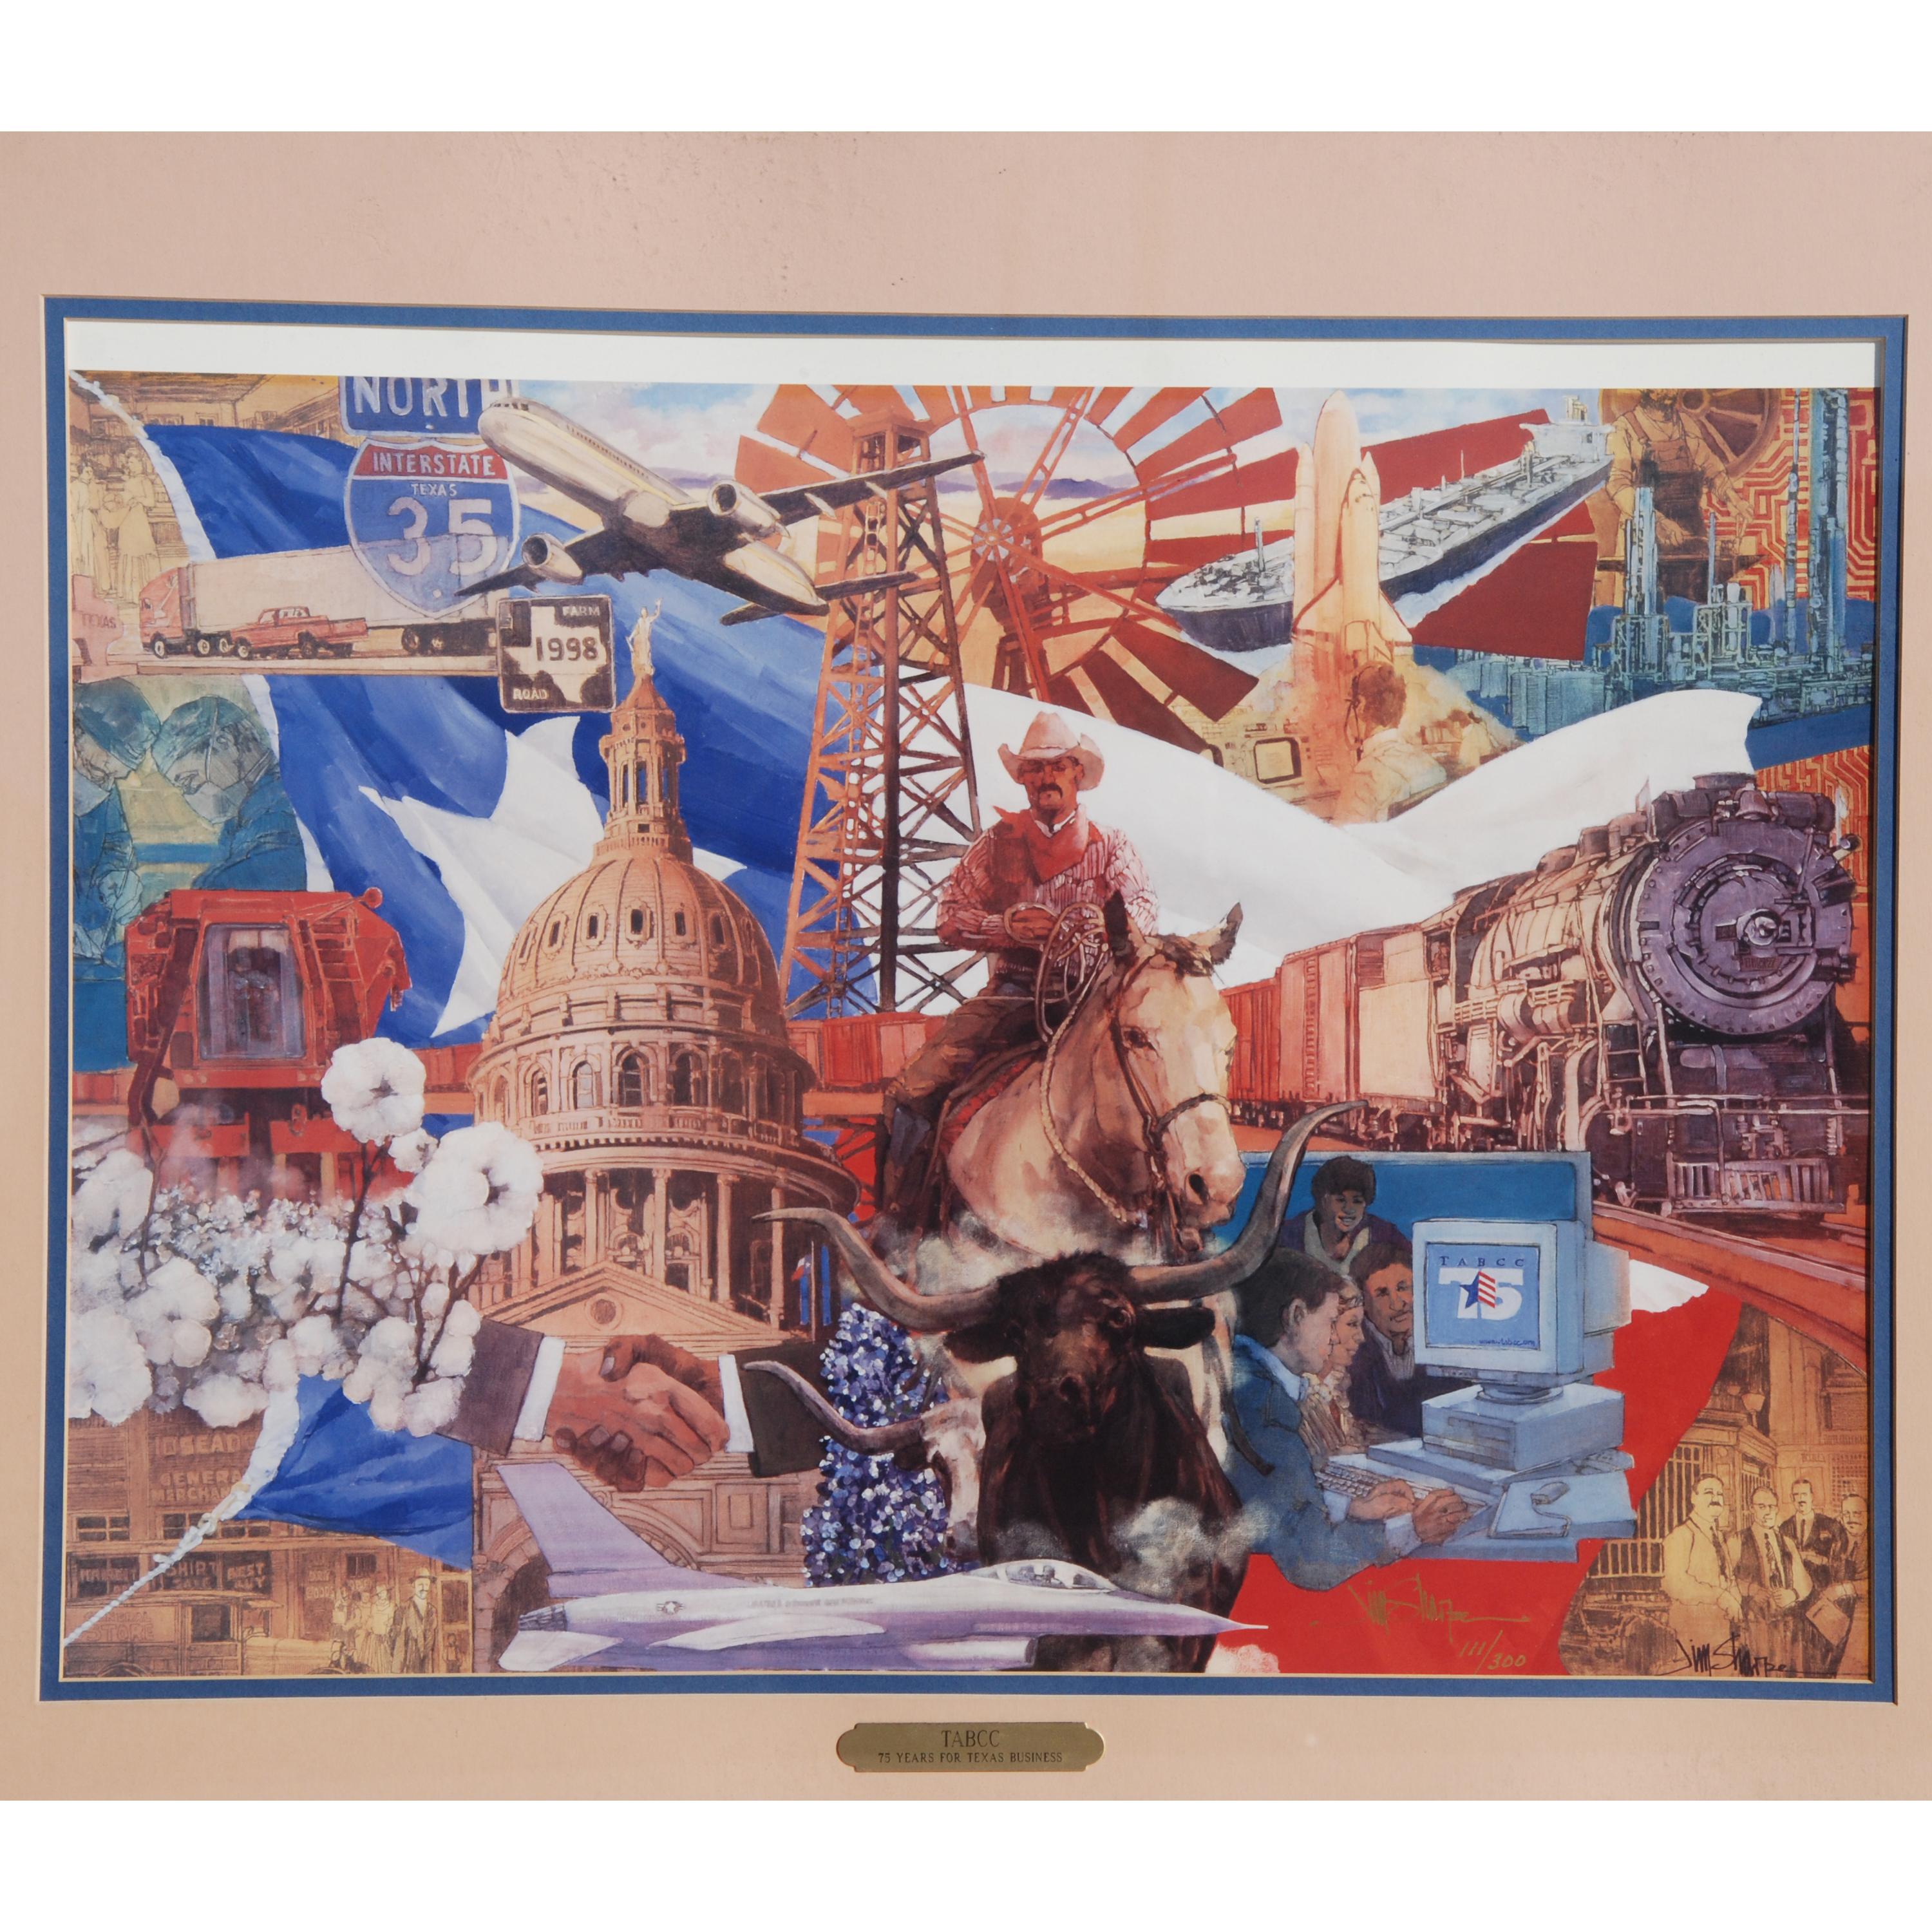 This illustration was commissioned by the Texas Association of Business and Chamber of Commerce to commemorate 75 years of Texas industry. It features several Classic Texas motifs, particularly relating to notable segments of Texas industry. Number